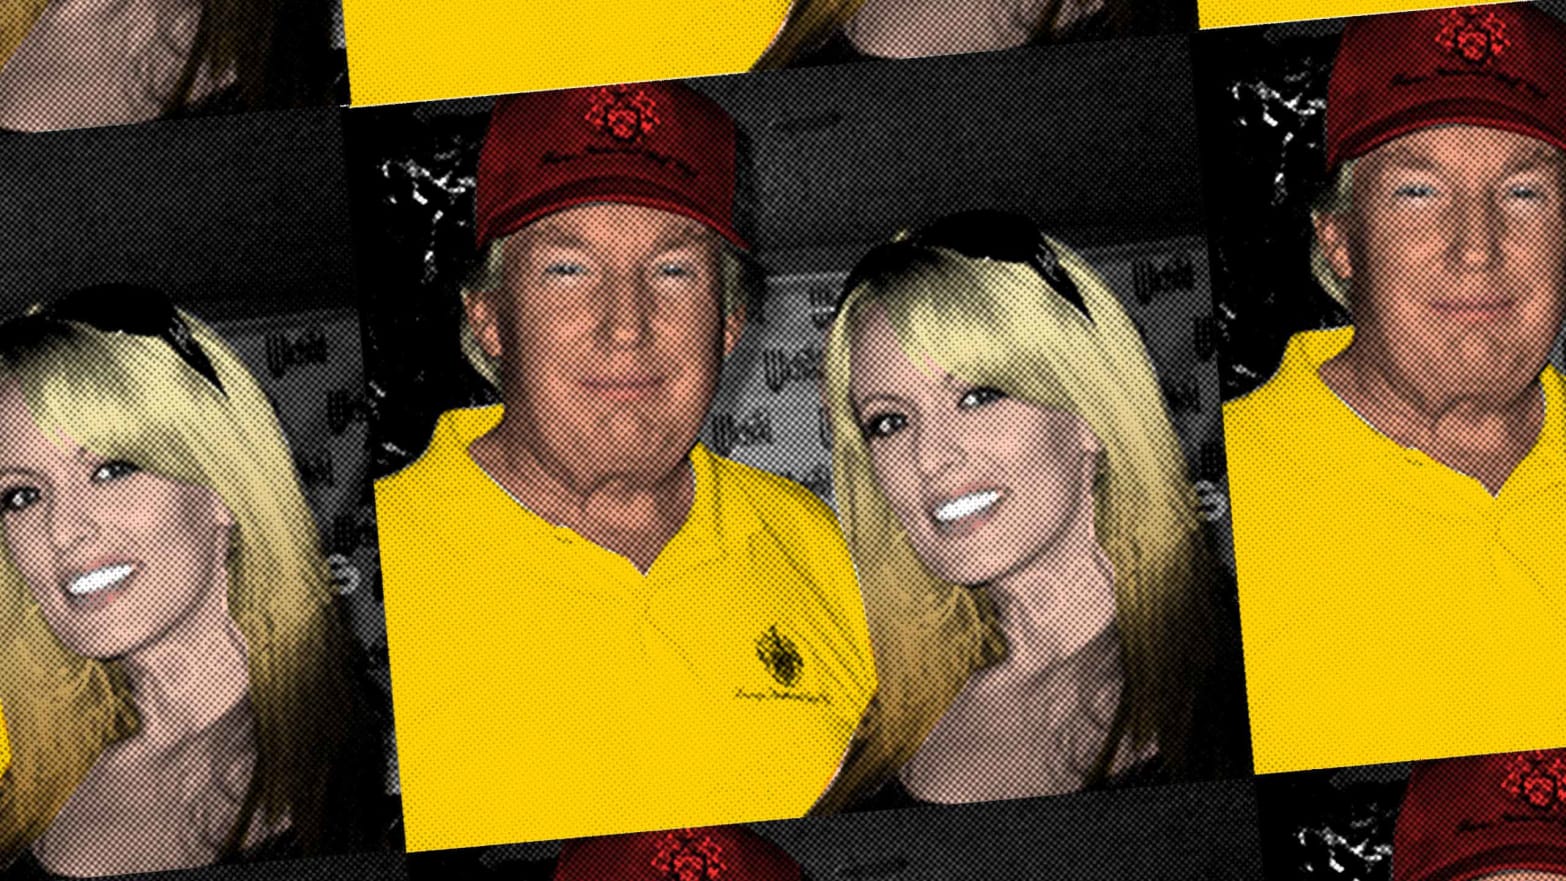 Ivanka Trump Sex Romance Hot Xxx - Porn Star: Donald Trump and Stormy Daniels Invited Me to Their ...